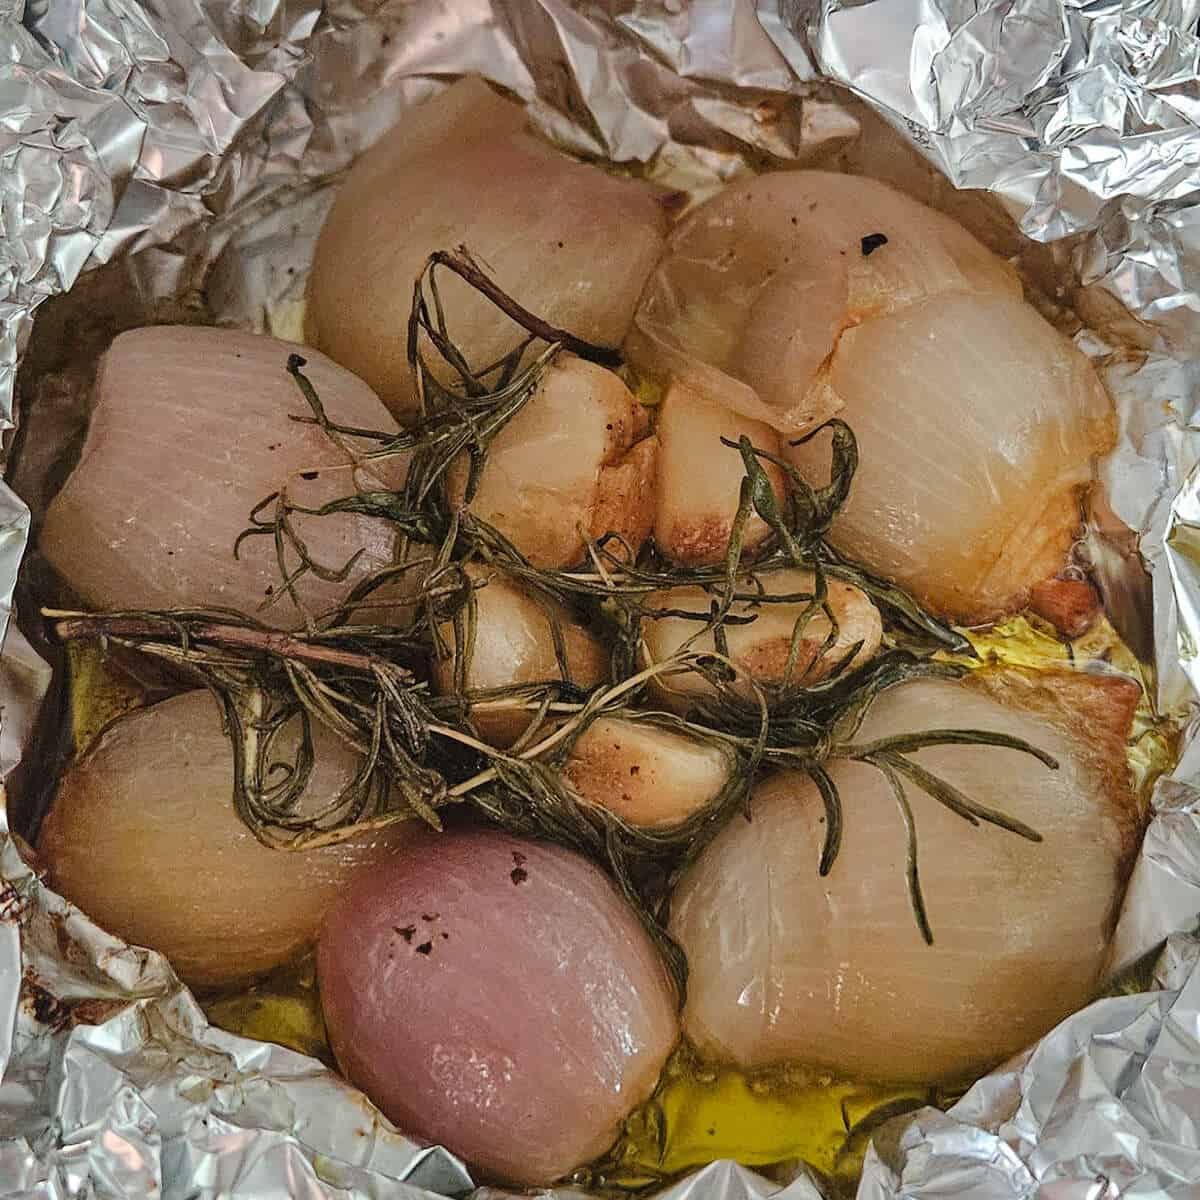 the finished roasted shallots, garlic, and rosemary in aluminum foil for the potato and shallot soup with crispy prosciutto